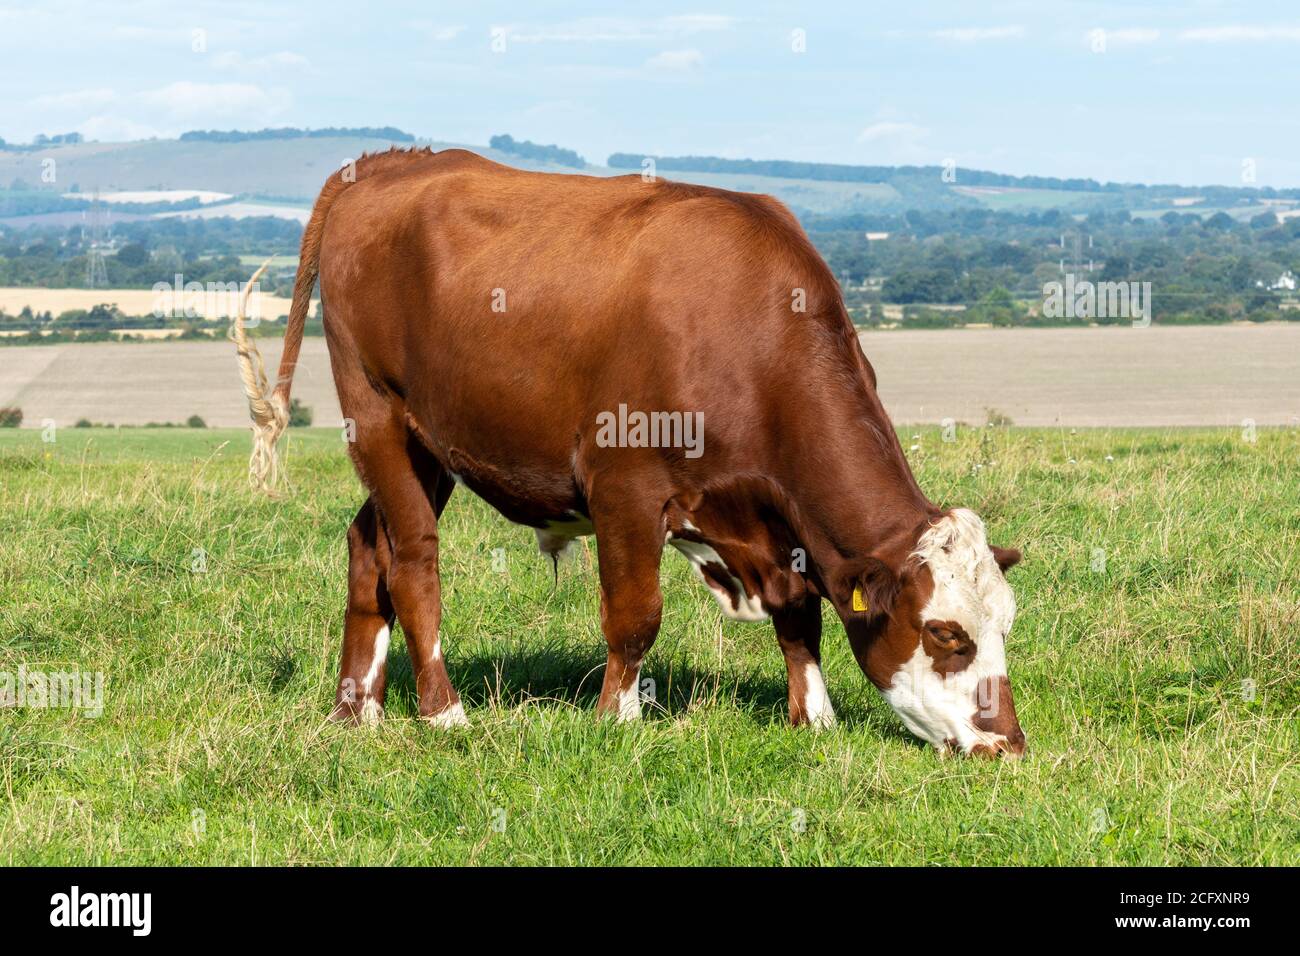 Hereford crossbred beef steer, a brown and white cow grazing in a field Stock Photo